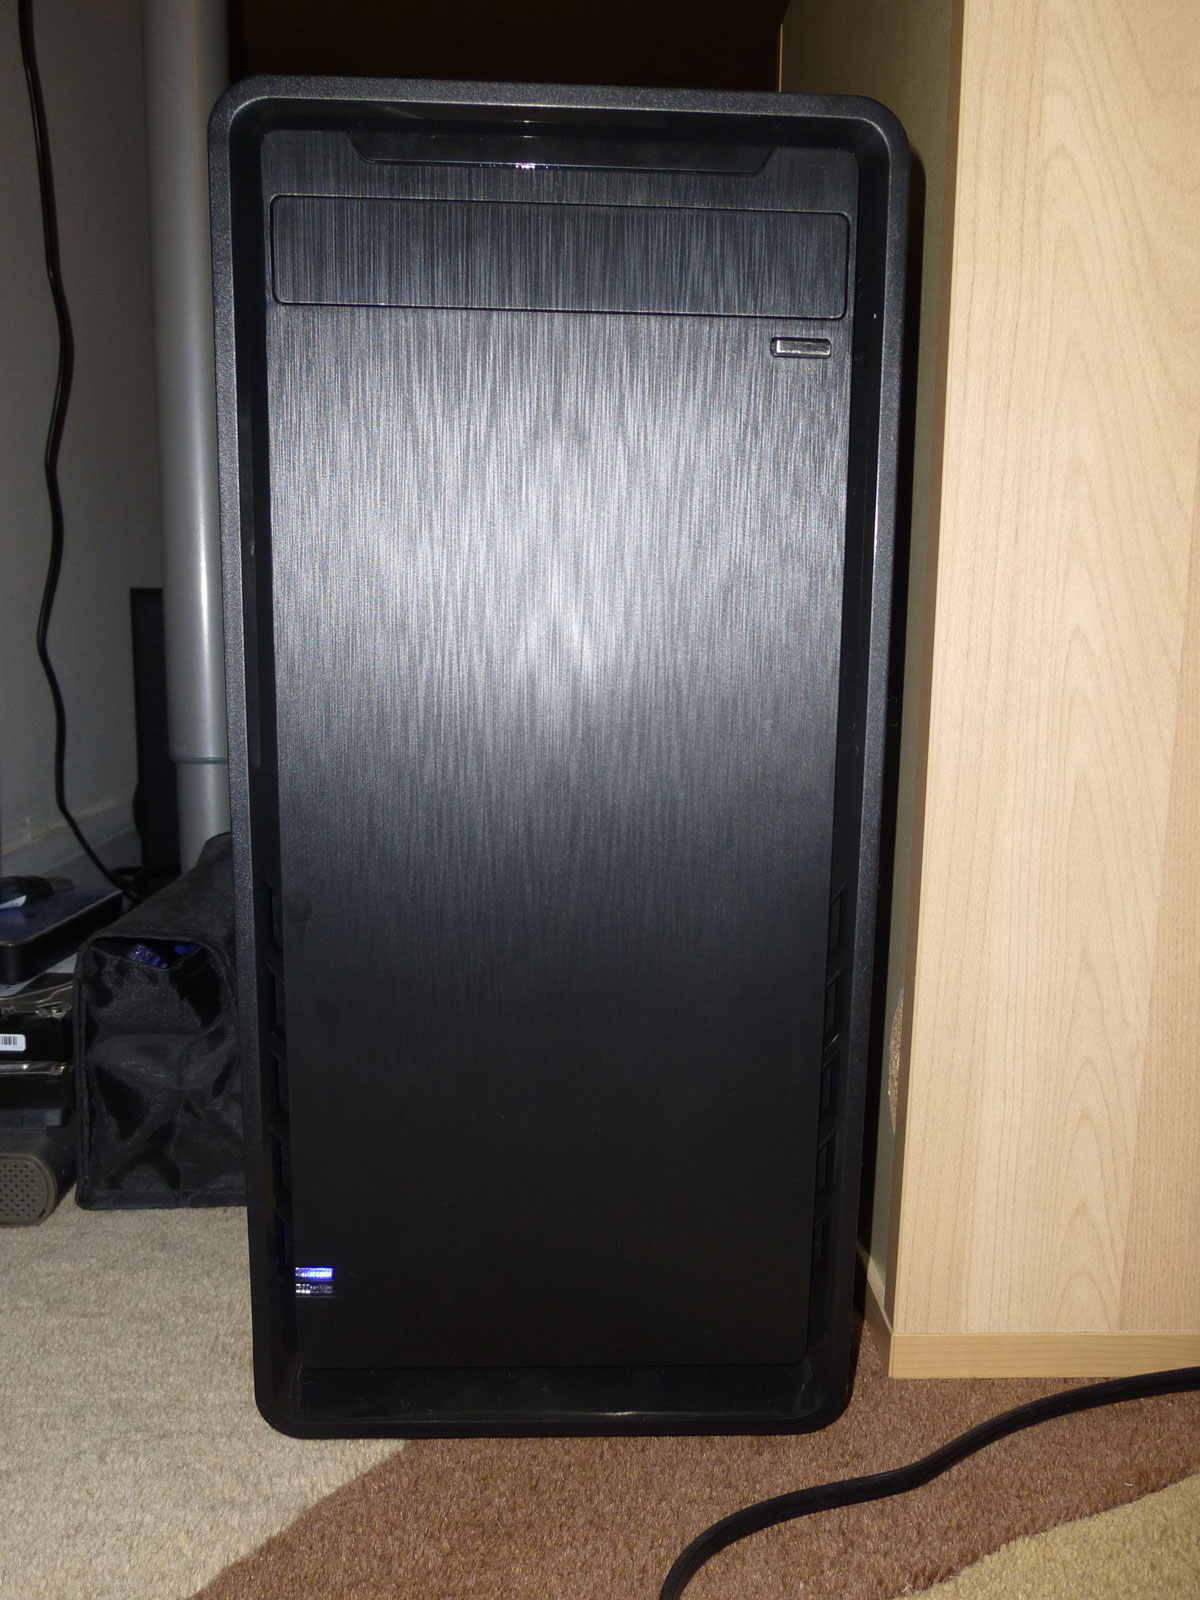 Assembled server - front view